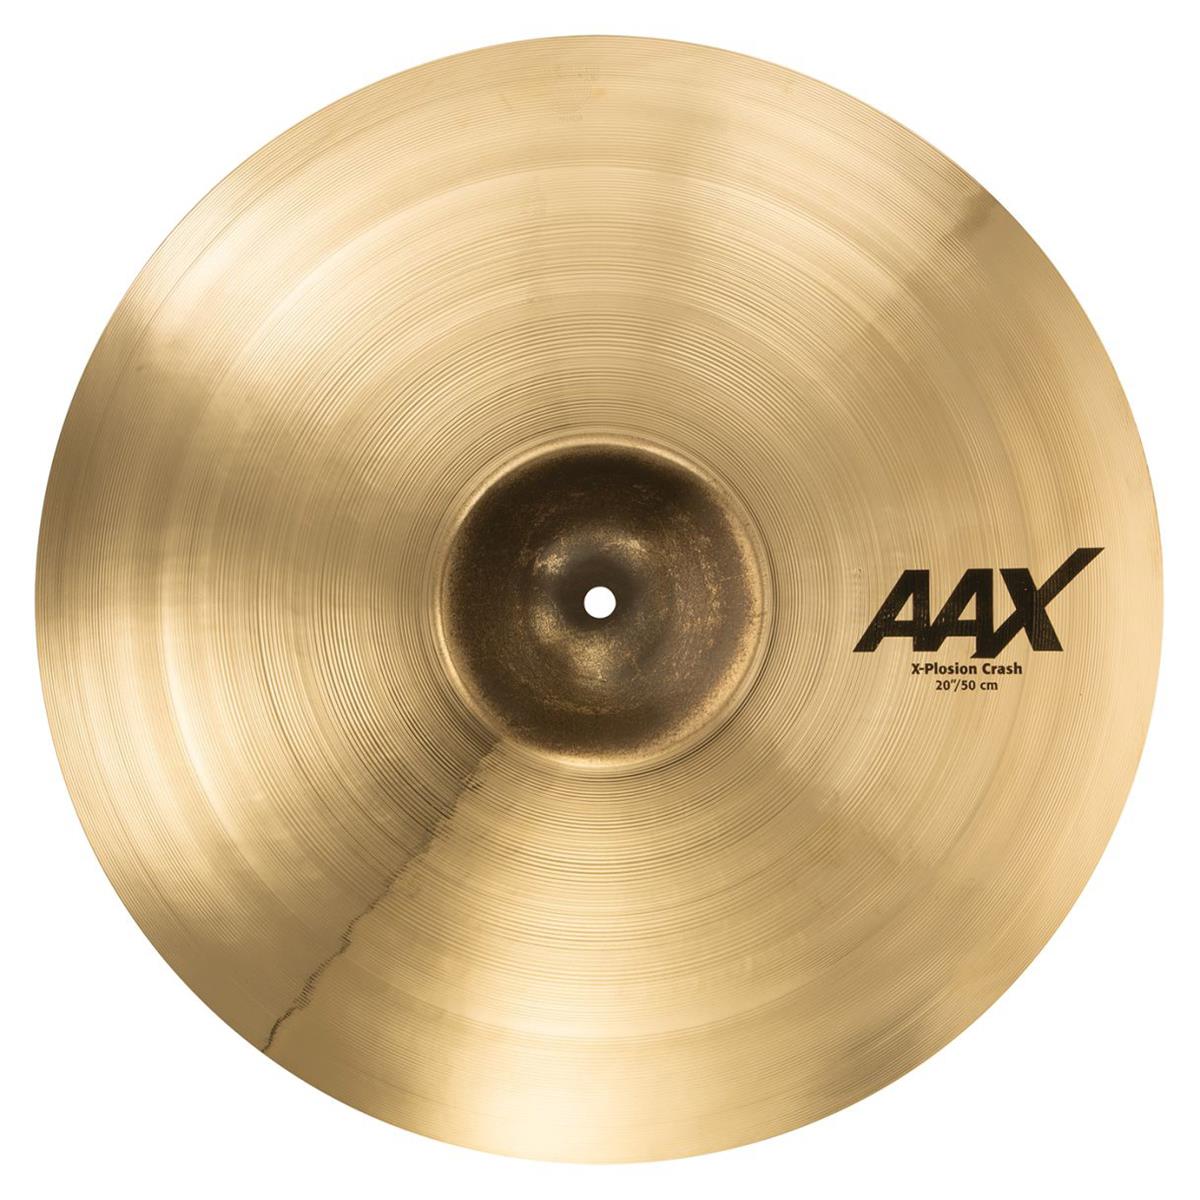 Sabian 20" AAX X-Plosion Crash Cymbal, Medium-Thin, Brilliant Bursting with energy, the innovative Sabian 20" AAX X-Plosion Crash explodes with fuller, punchier power. Also available in an XT Fast Crash model and 11" AAX Splash. The Sabian AAX series delivers consistently bright, crisp, clear and cutting responses - AAX is the ultimate Modern Bright sound!